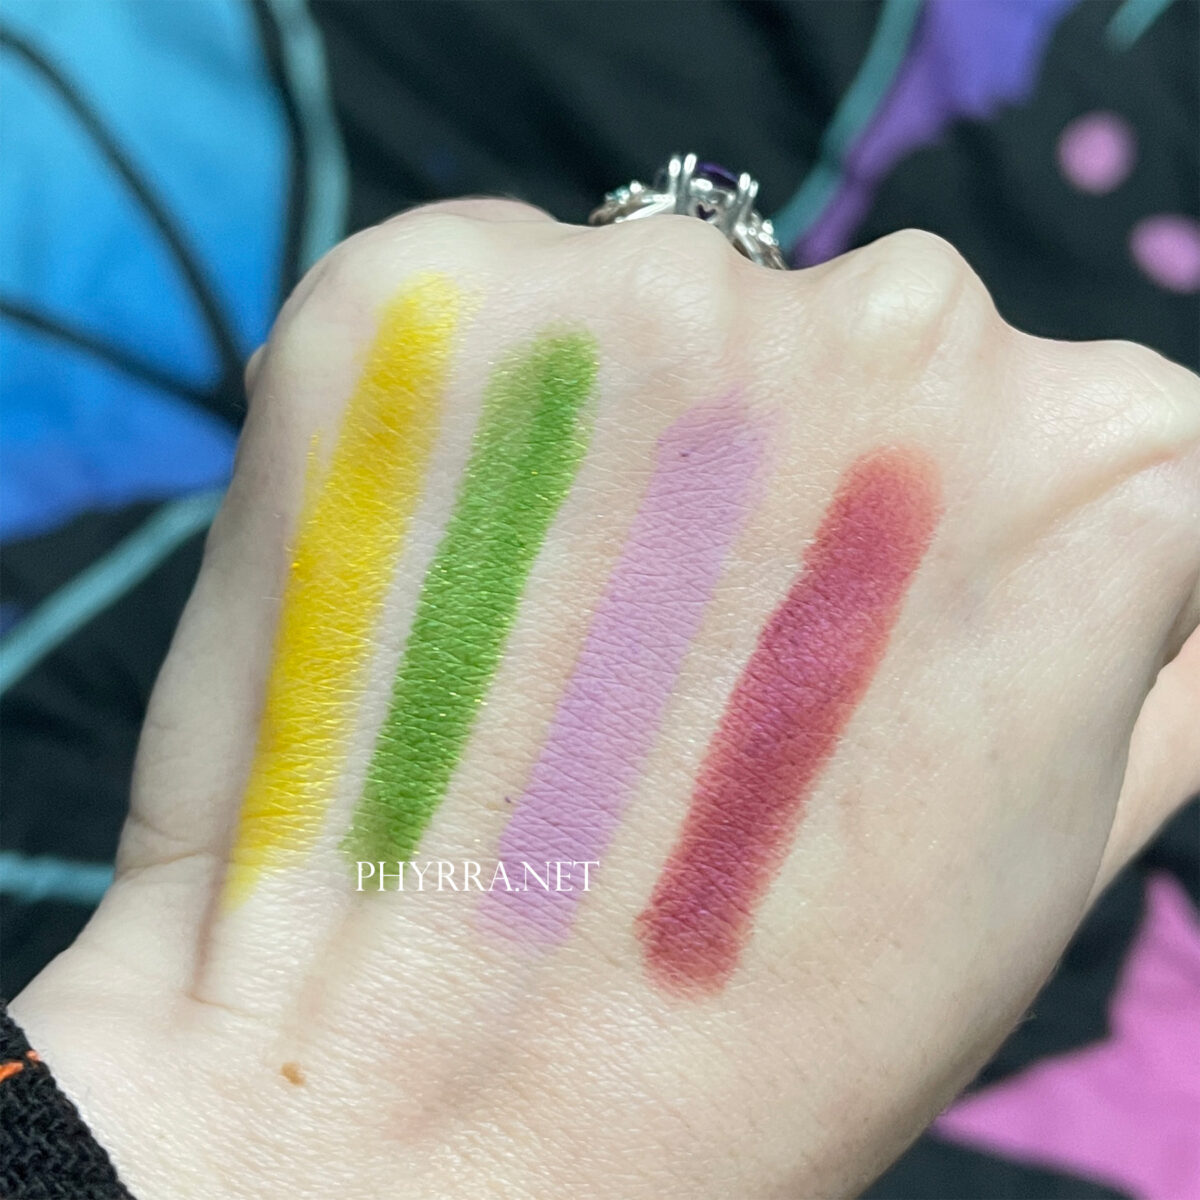 Lime Crime Electric Slide swatches on fair skin